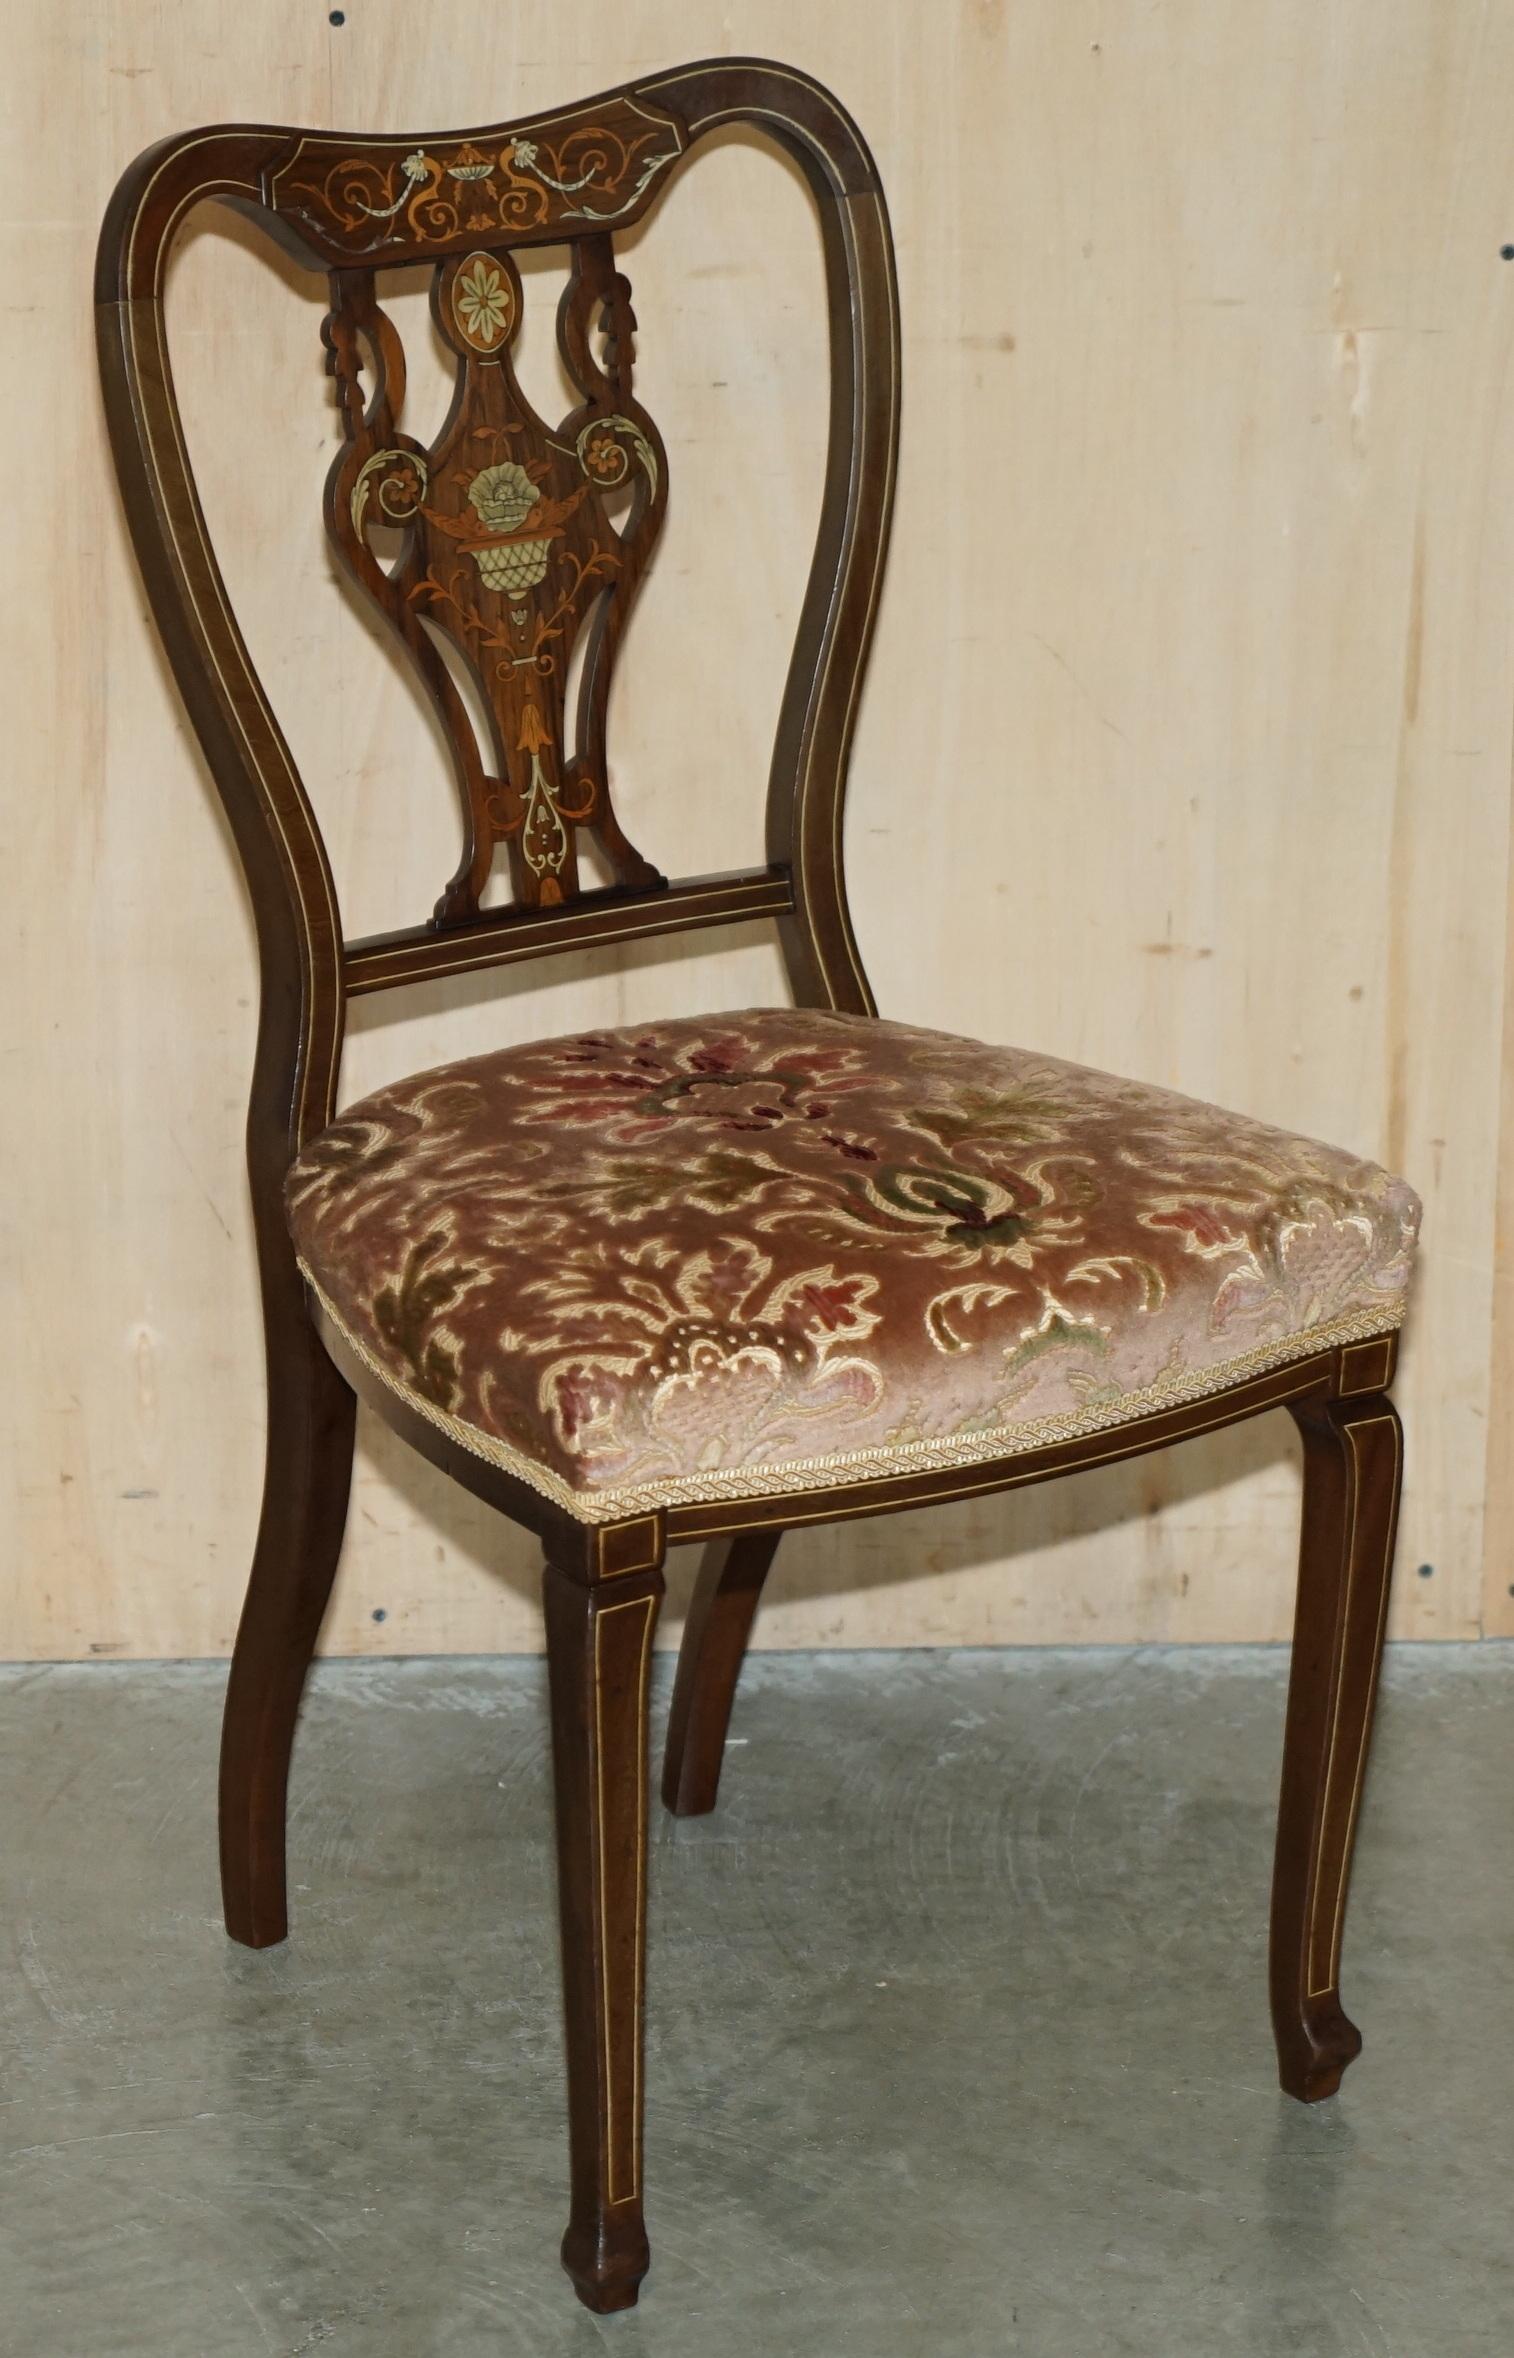 FOUR EXQUISITE ANTIQUE ViCTORIAN JAS SHOOLBRED RETAILED HARDWOOD DINING CHAIRS For Sale 8